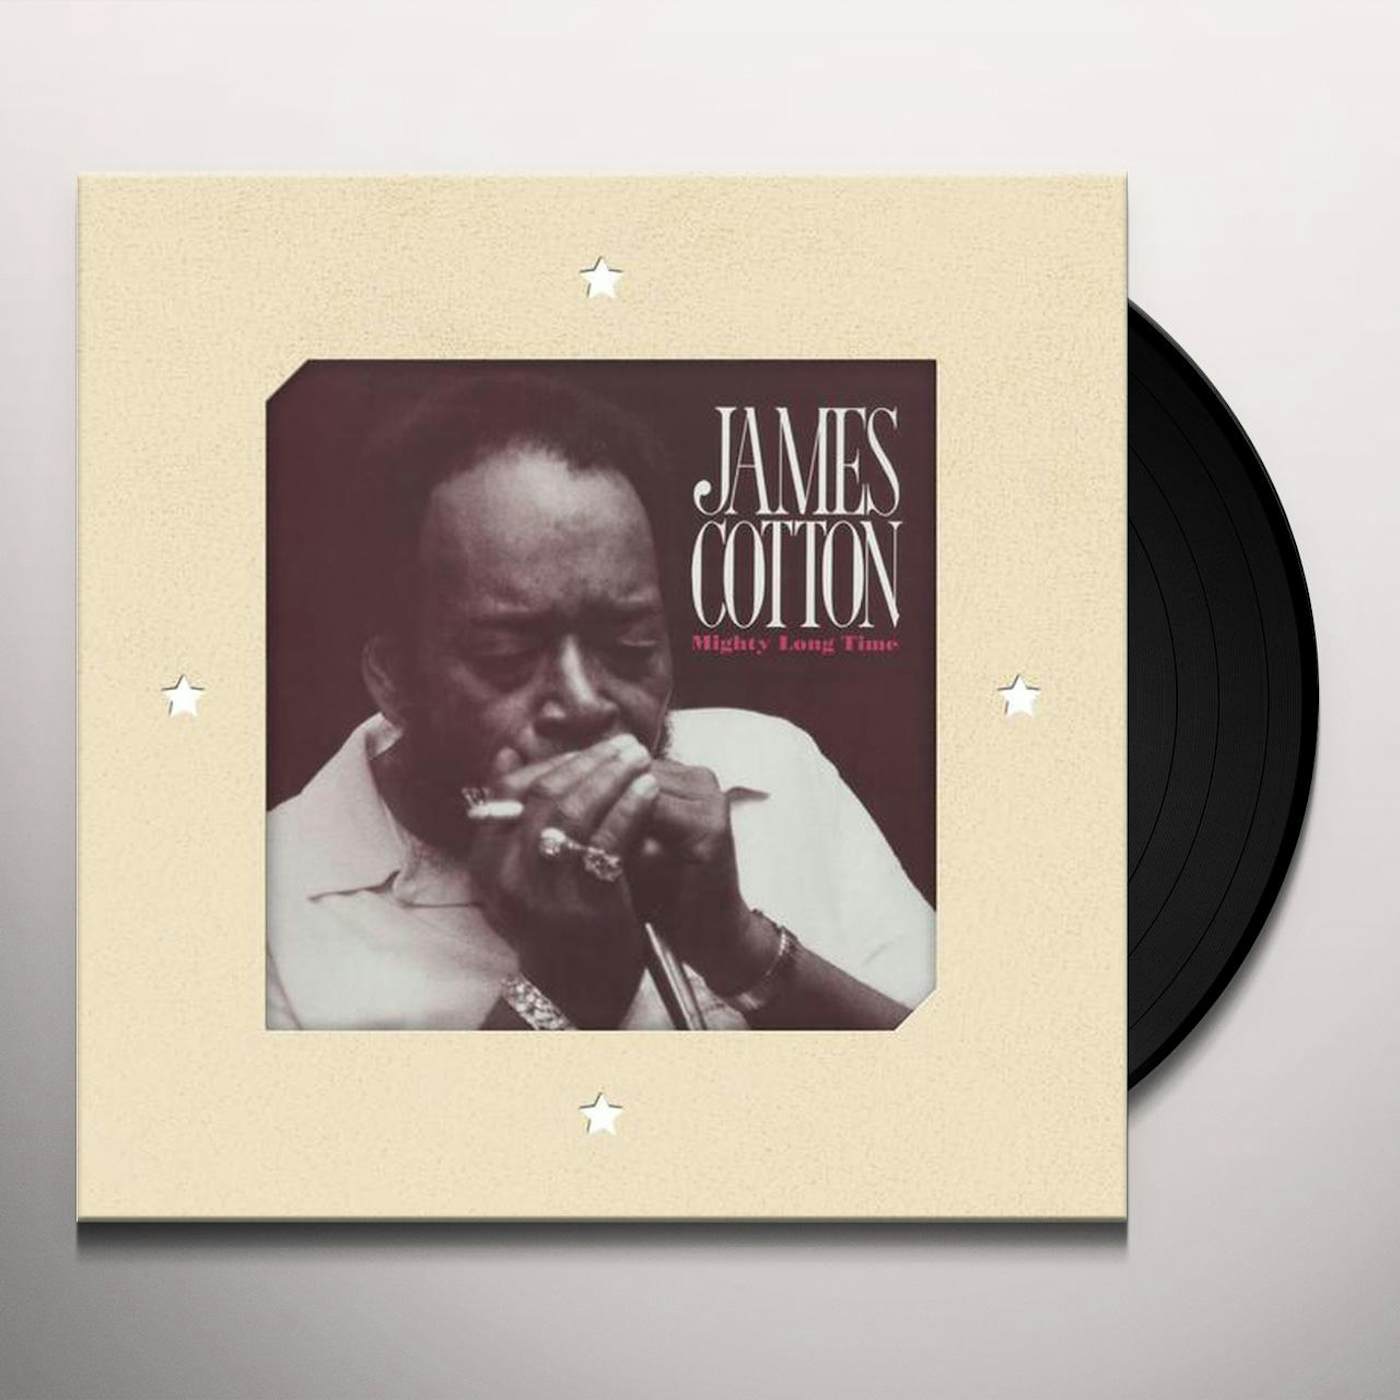 James Cotton Mighty Long Time Vinyl Record